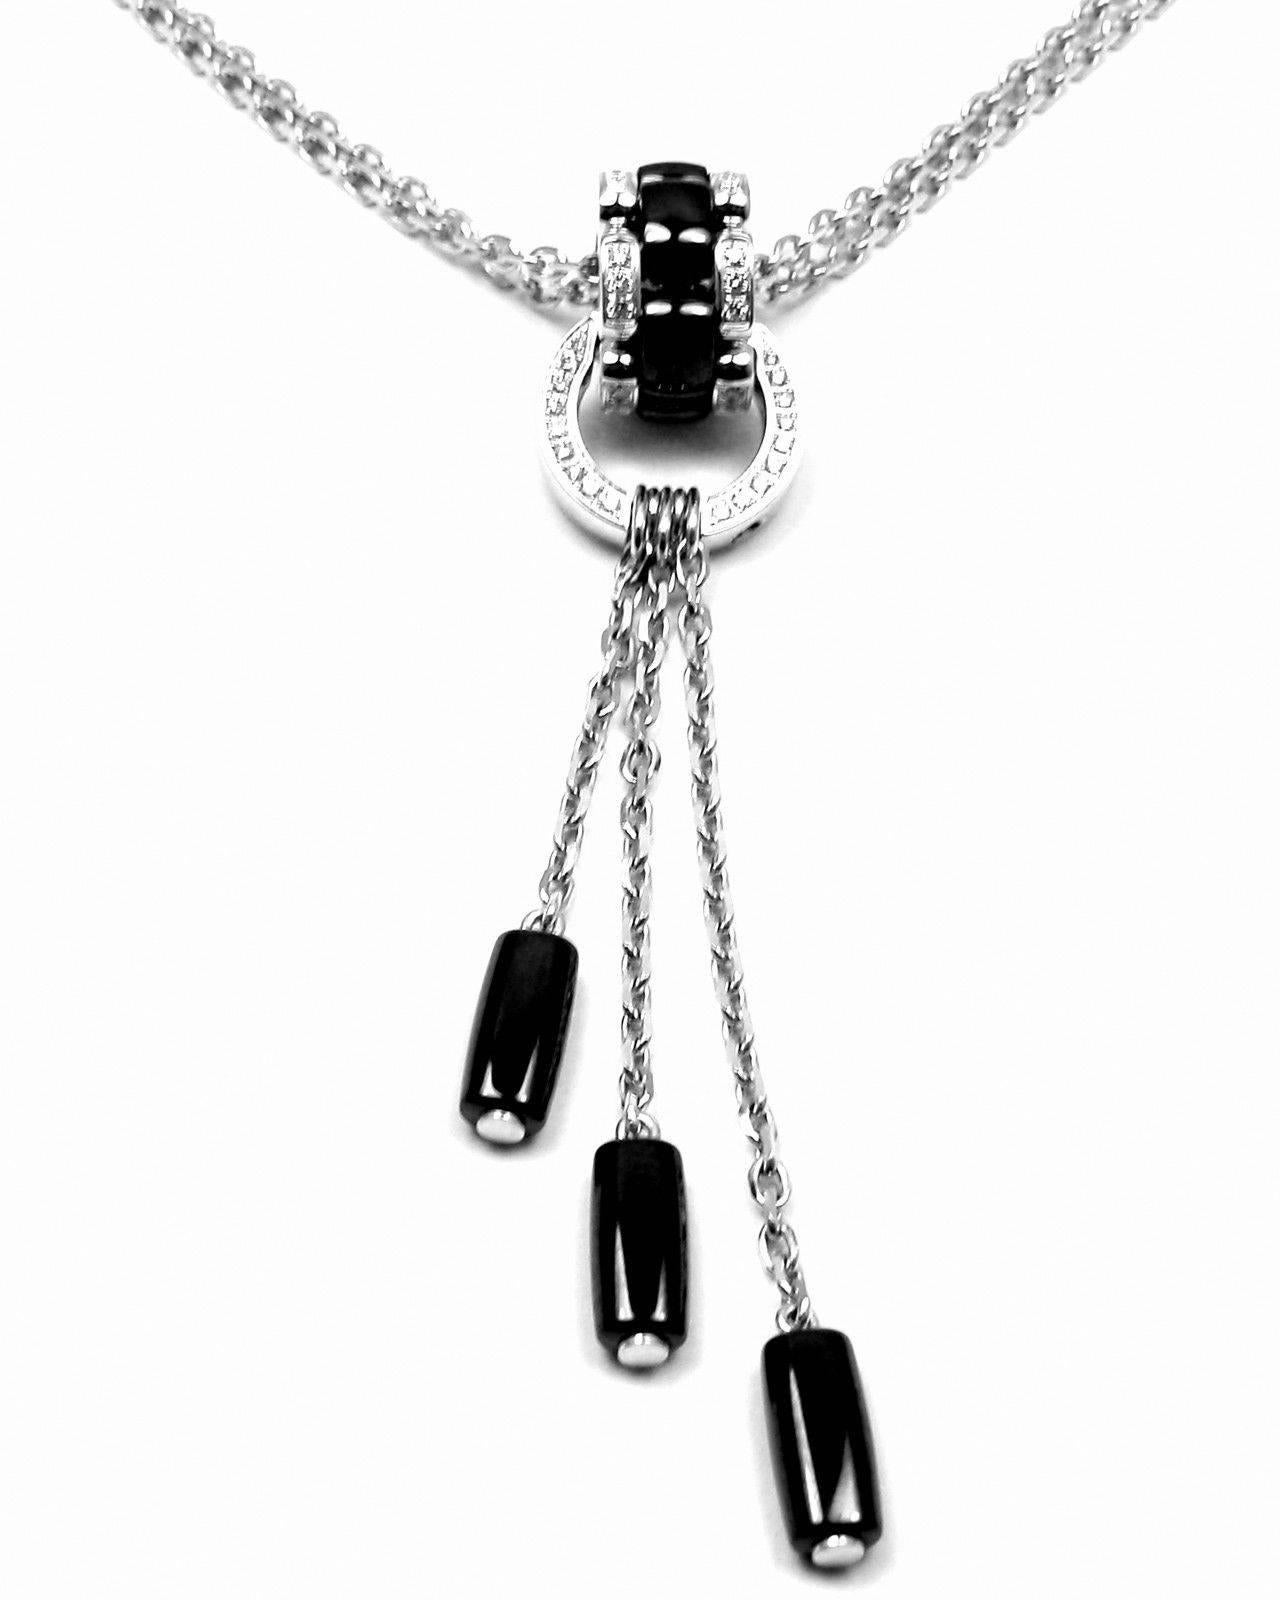 18k White Gold Diamond & Black Ceramic Ulta Pendant Necklace by Chanel. 
With 60 Diamonds, VS1 Clarity, F Color. Total Diamond Weight: .60CT. 

Details: 
Length: Length: 16